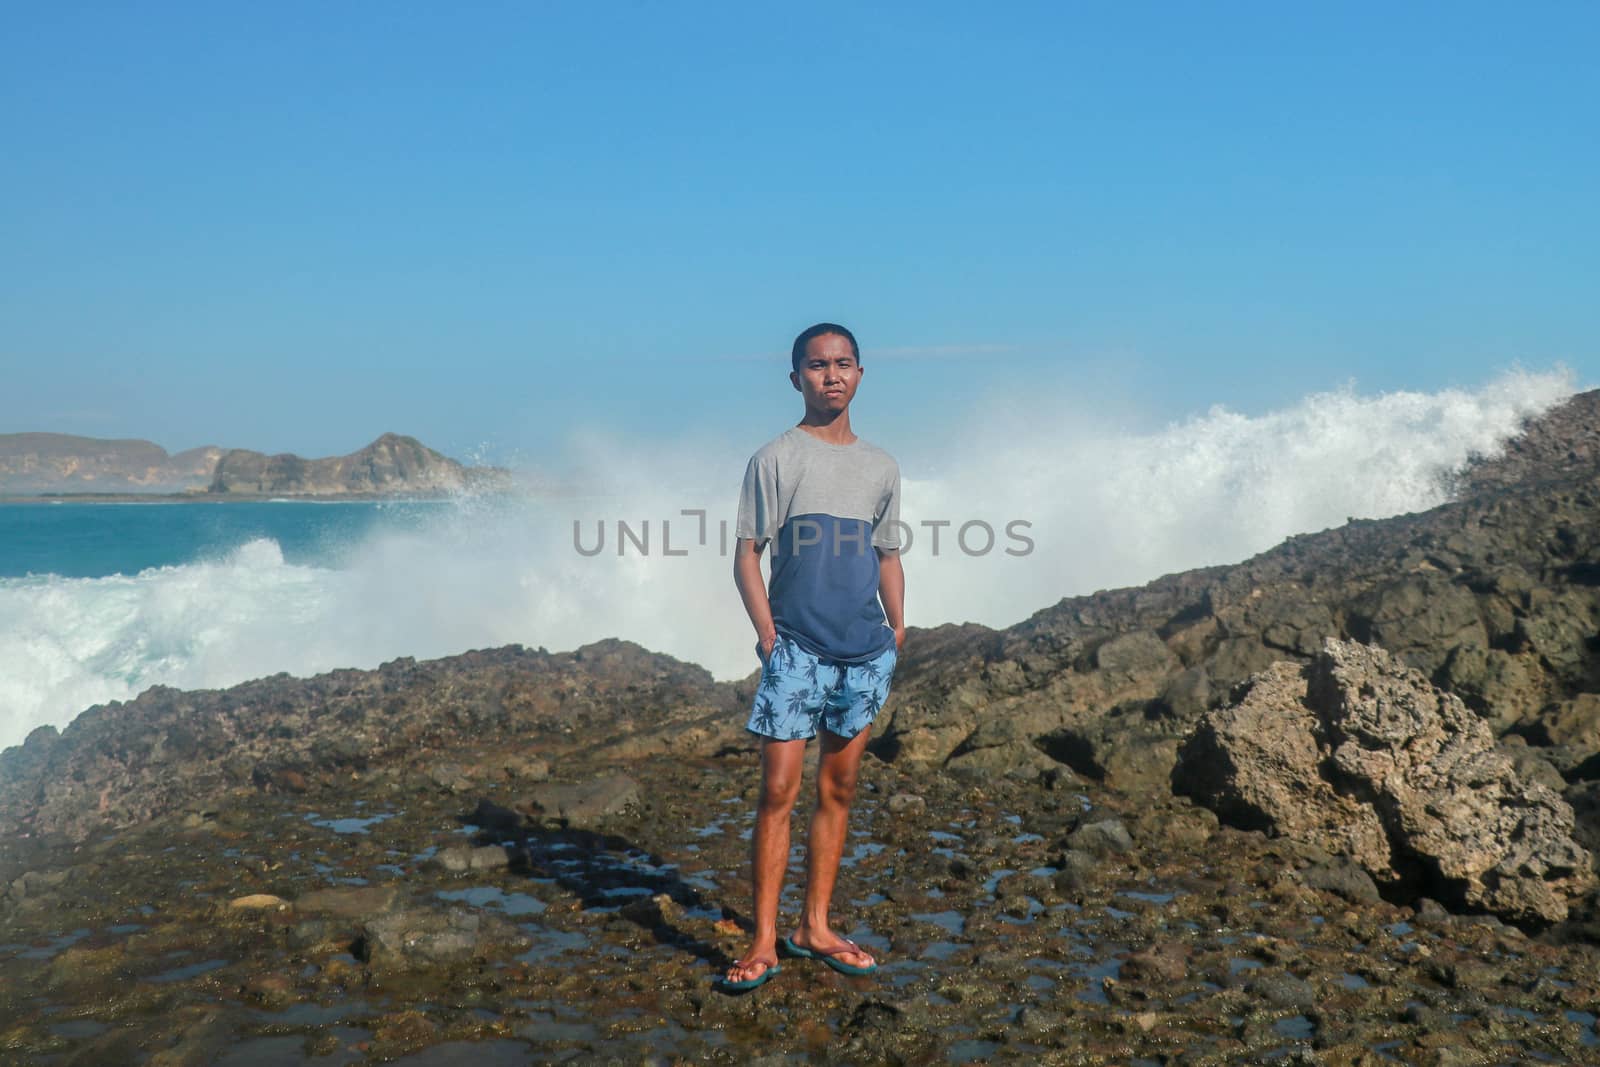 Waves hitting round rocks and splashing. A young man stands on a rocky shore and the waves crash against a cliff.